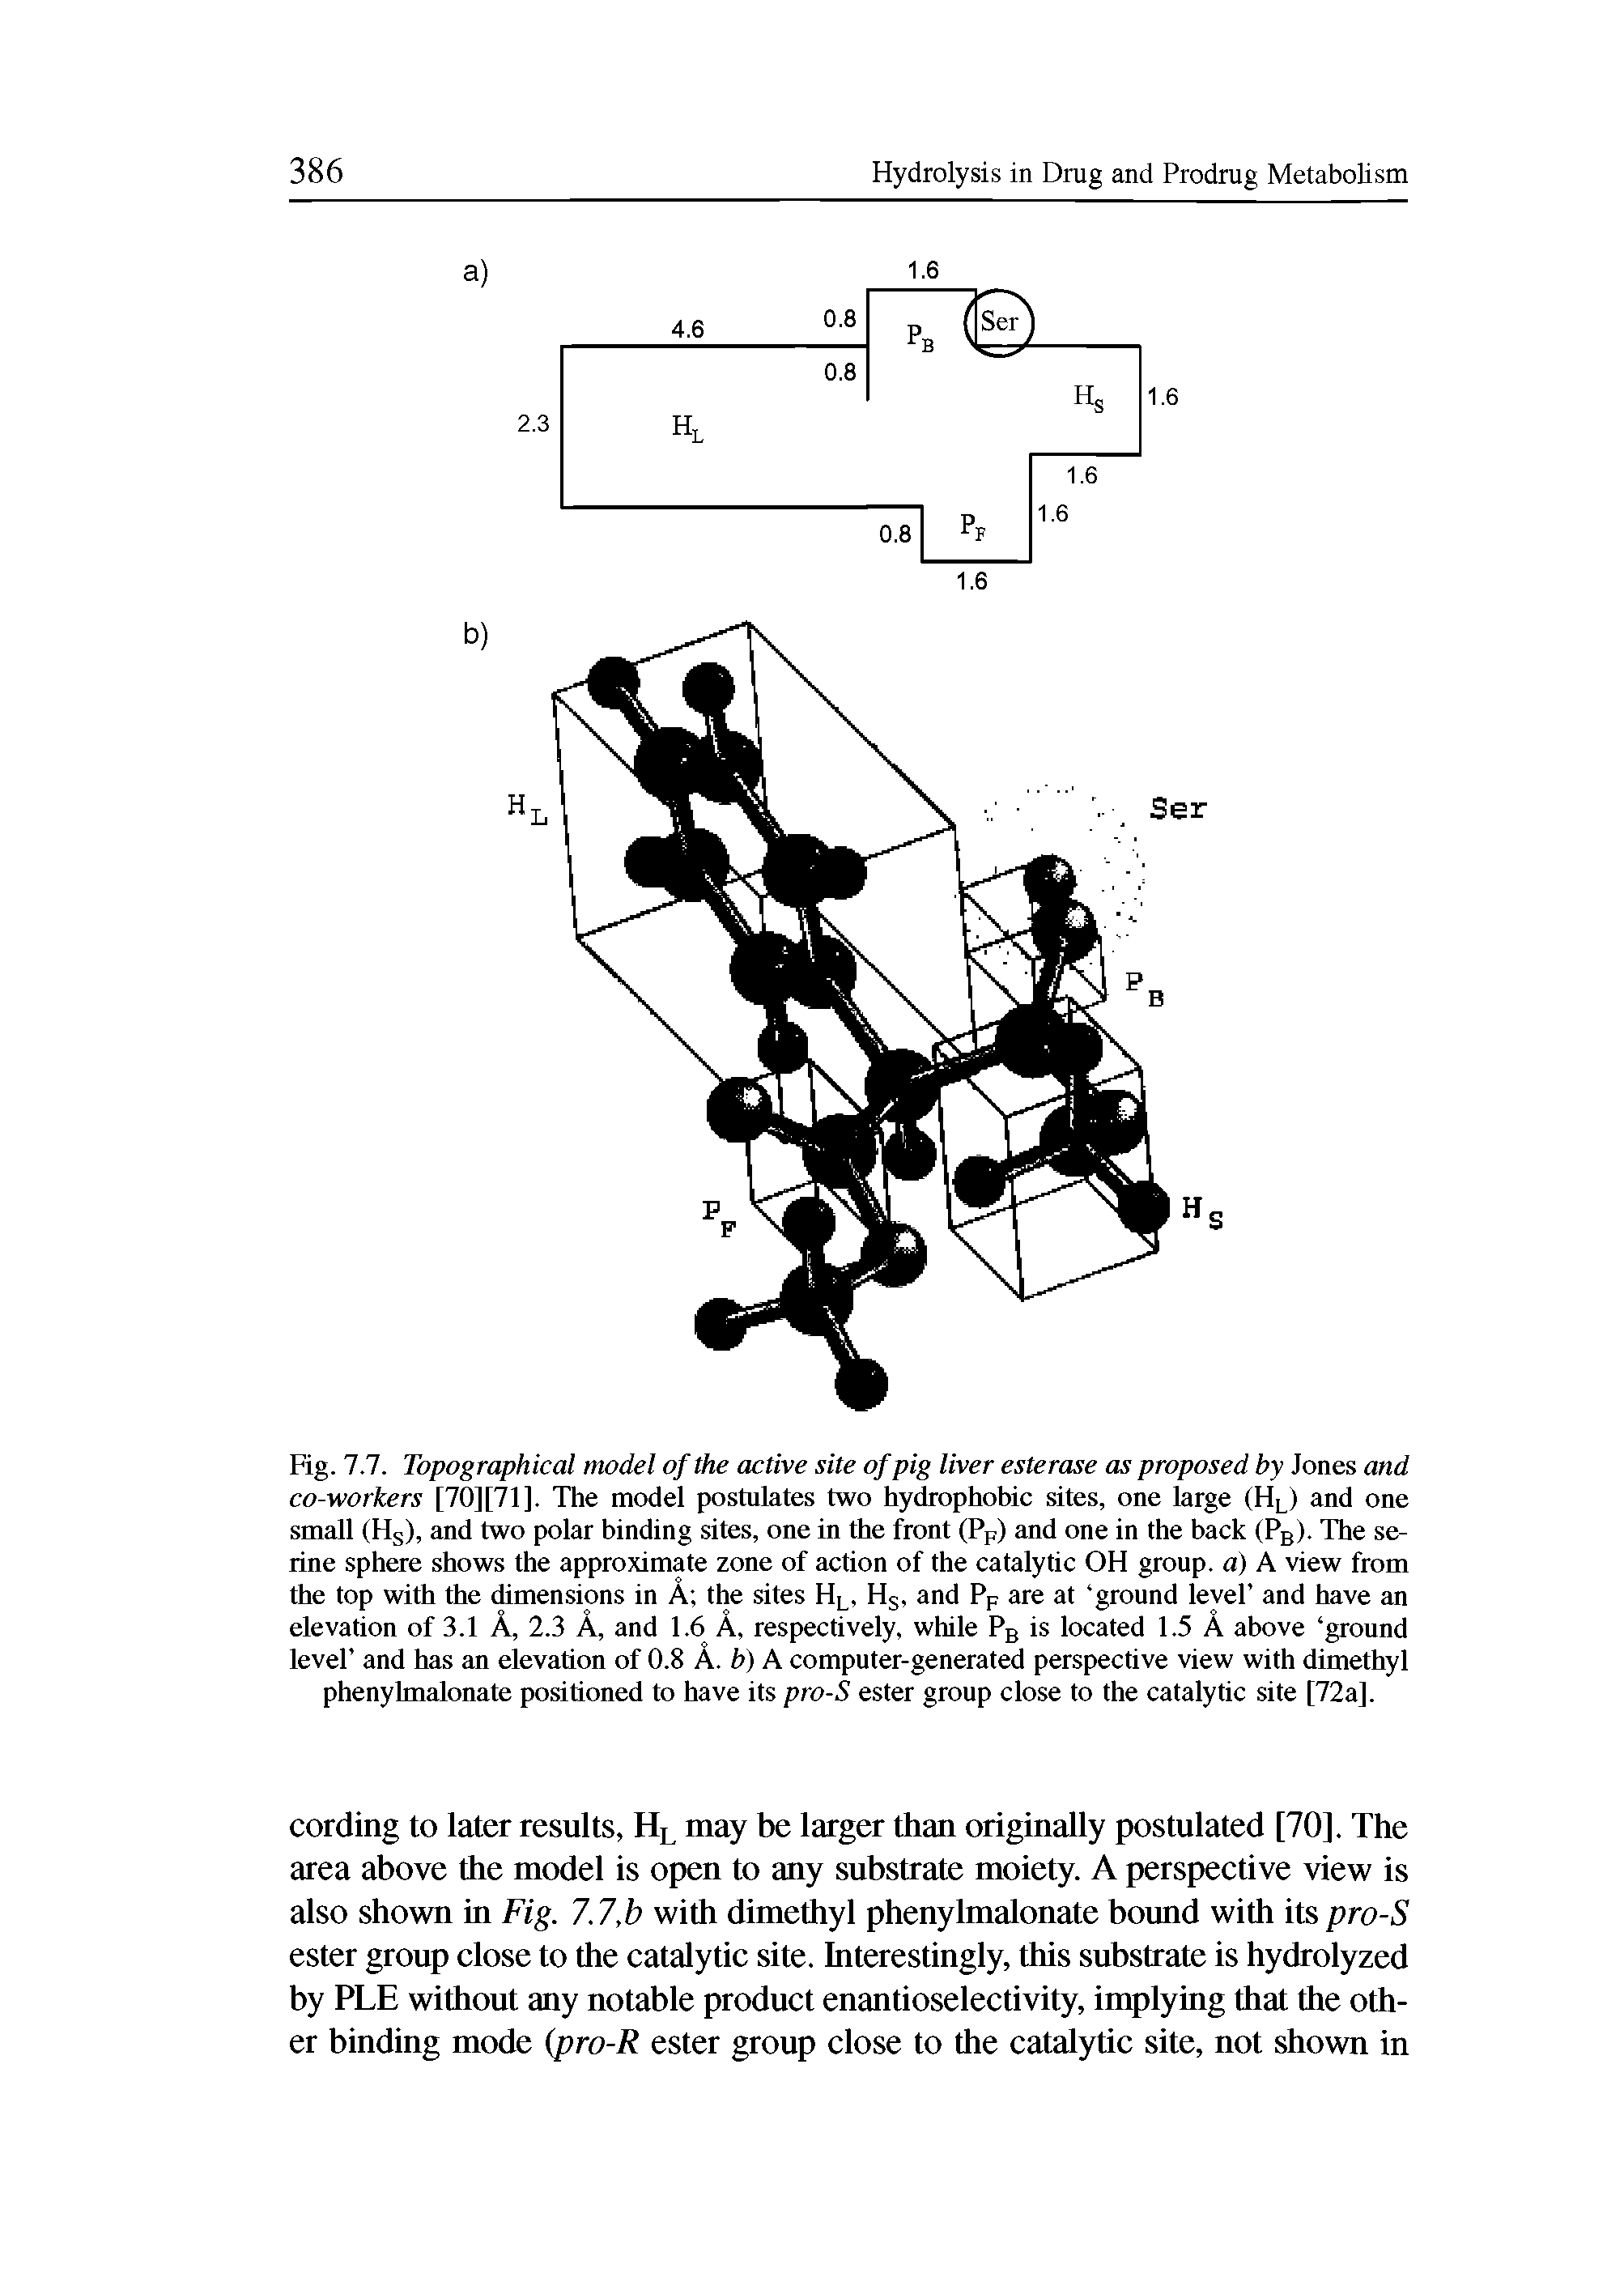 Fig. 7.7. Topographical model of the active site of pig liver esterase as proposed by Jones and co-workers [70] [71]. The model postulates two hydrophobic sites, one large (HL) and one small (Hs), and two polar binding sites, one in the front (PF) and one in the back (PB). The serine sphere shows the approximate zone of action of the catalytic OH group, a) A view from the top with the dimensions in A the sites HL, Hs, and PF are at ground level and have an elevation of 3.1 A, 2.3 A, and 1.6 A, respectively, while PB is located 1.5 A above ground level and has an elevation of 0.8 A. b) A computer-generated perspective view with dimethyl phenylmalonate positioned to have its pro-S ester group close to the catalytic site [72a].